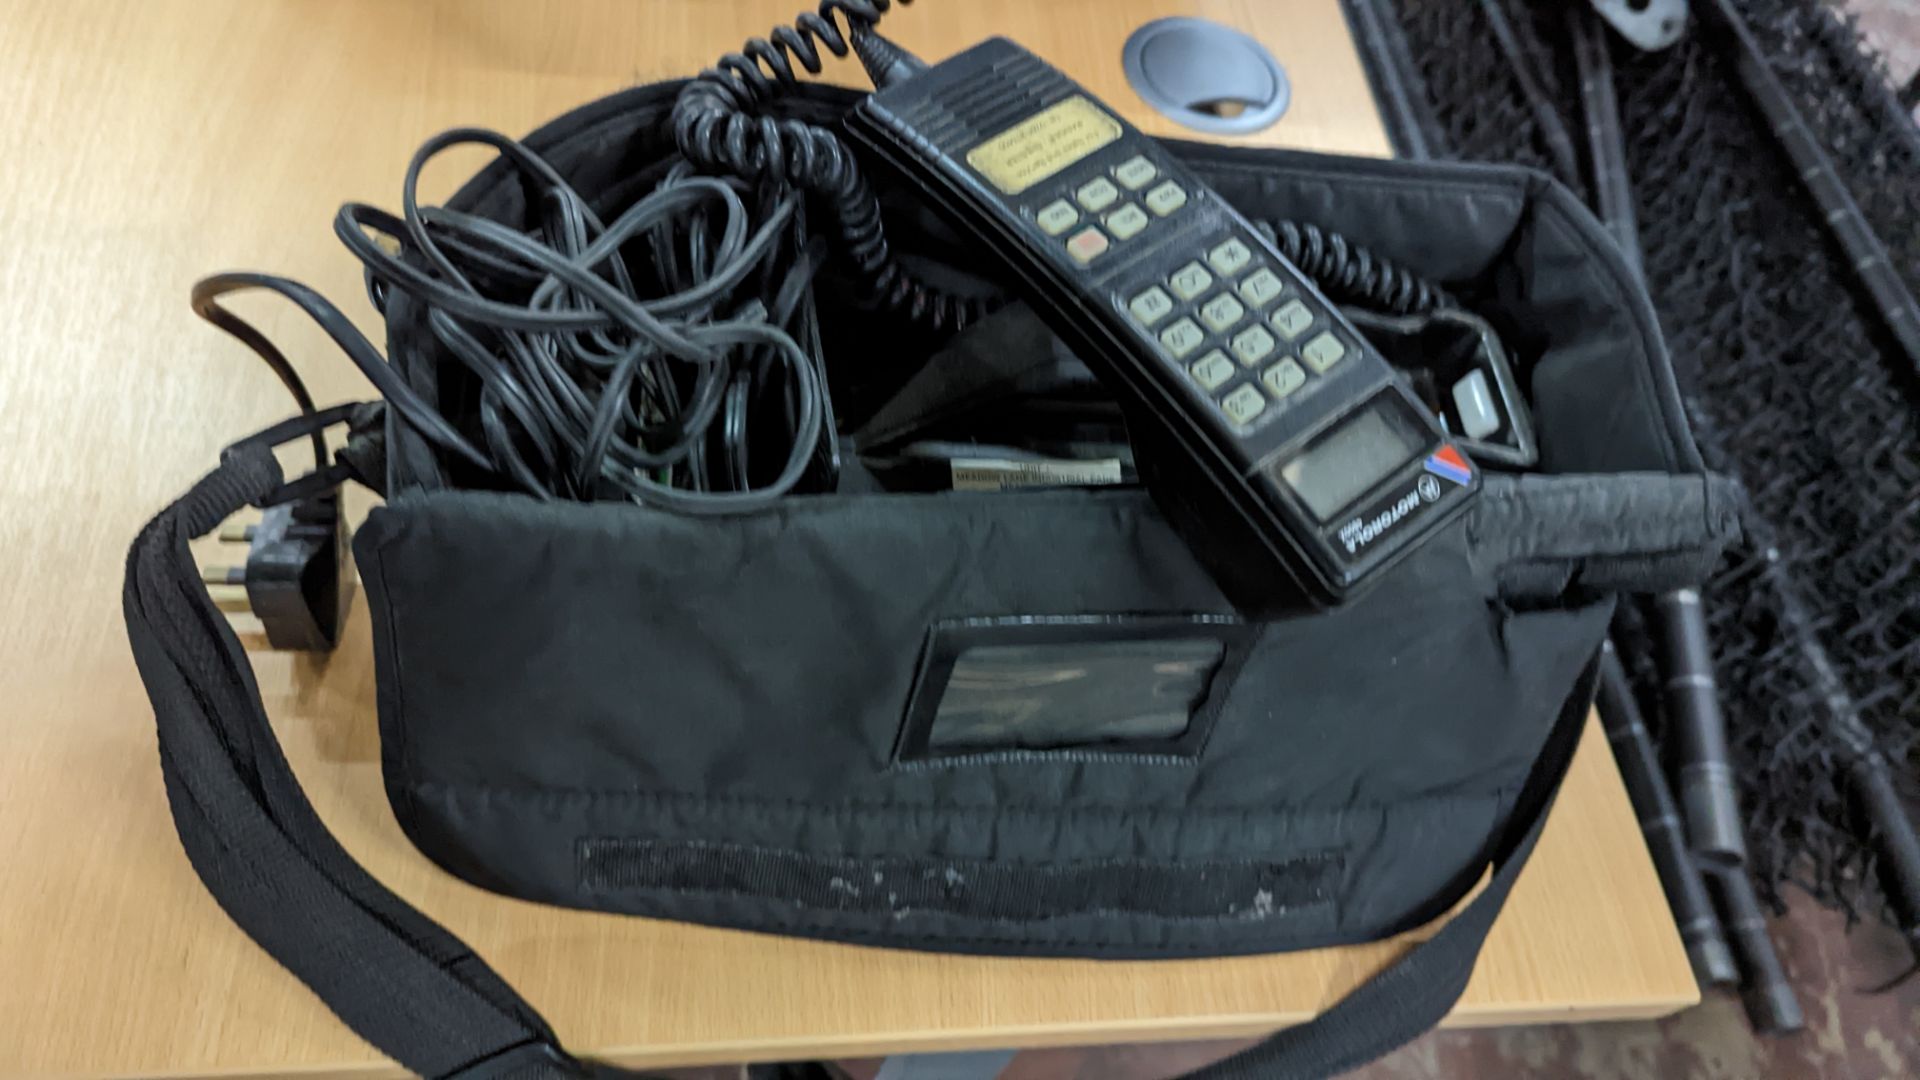 Vintage Motorola 4800X mobile phone system with carry case - Image 5 of 5